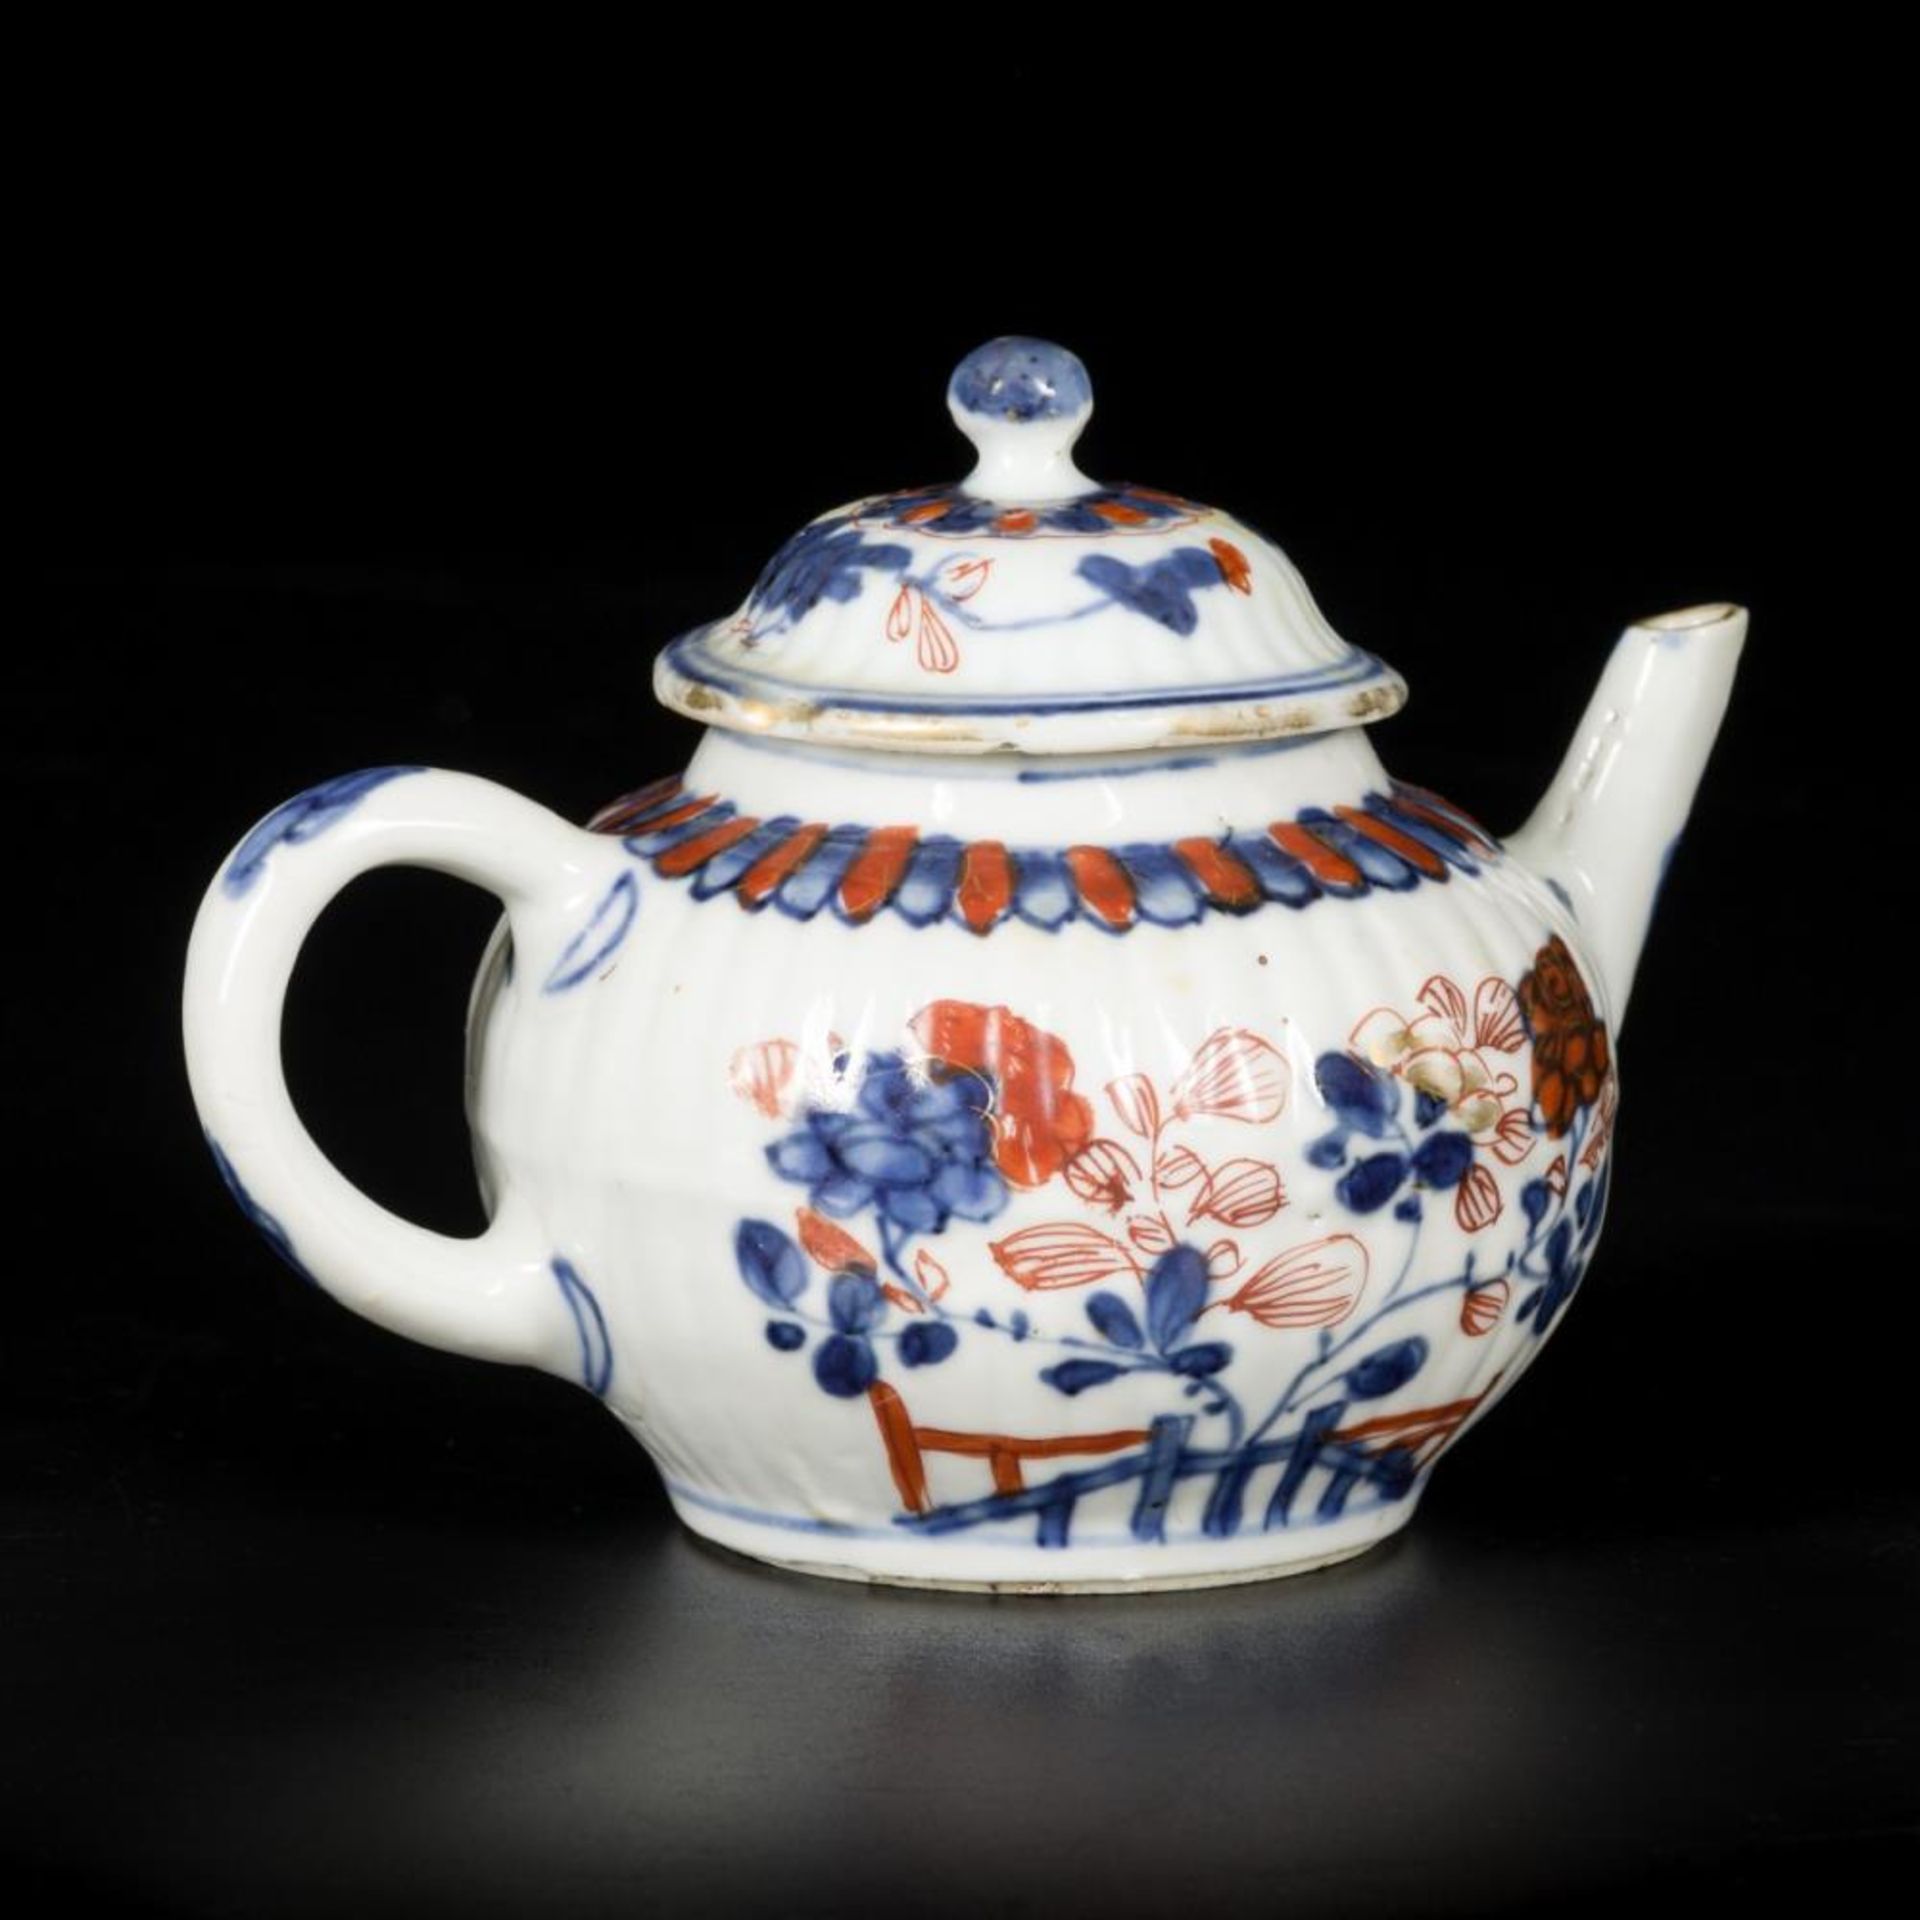 A porcelain Imari teapot with lid, China, 18th century. - Image 2 of 8